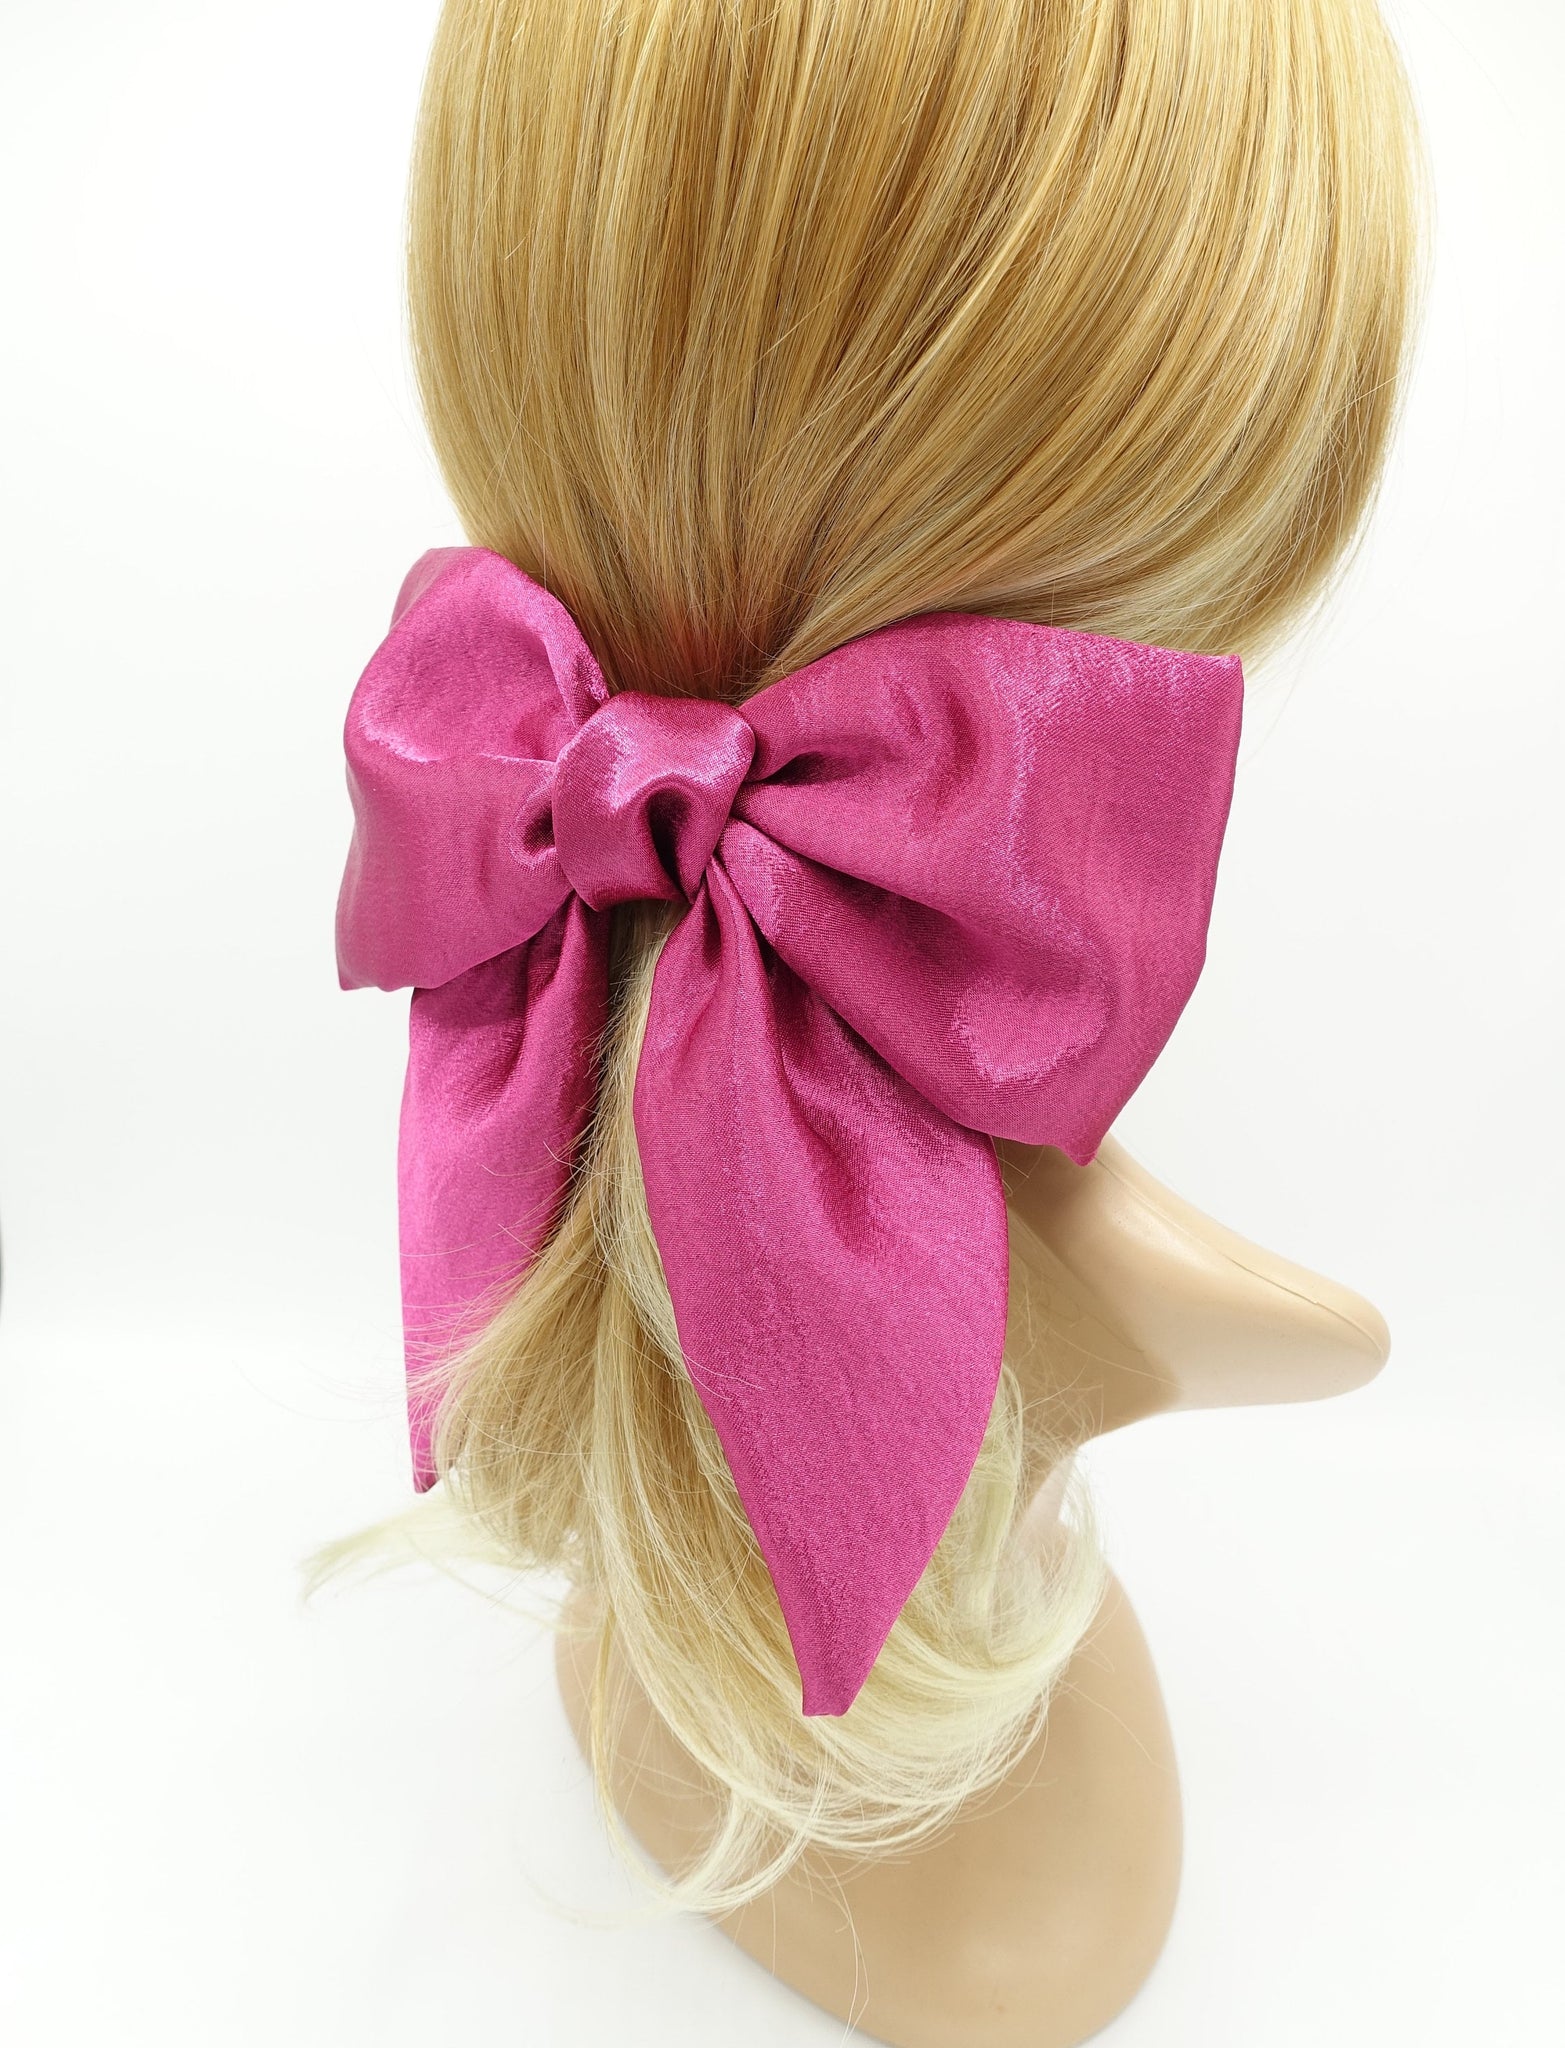 veryshine.com Barrettes & Clips Hot pink big satin hair bow pointed tail glossy hair accessory for women